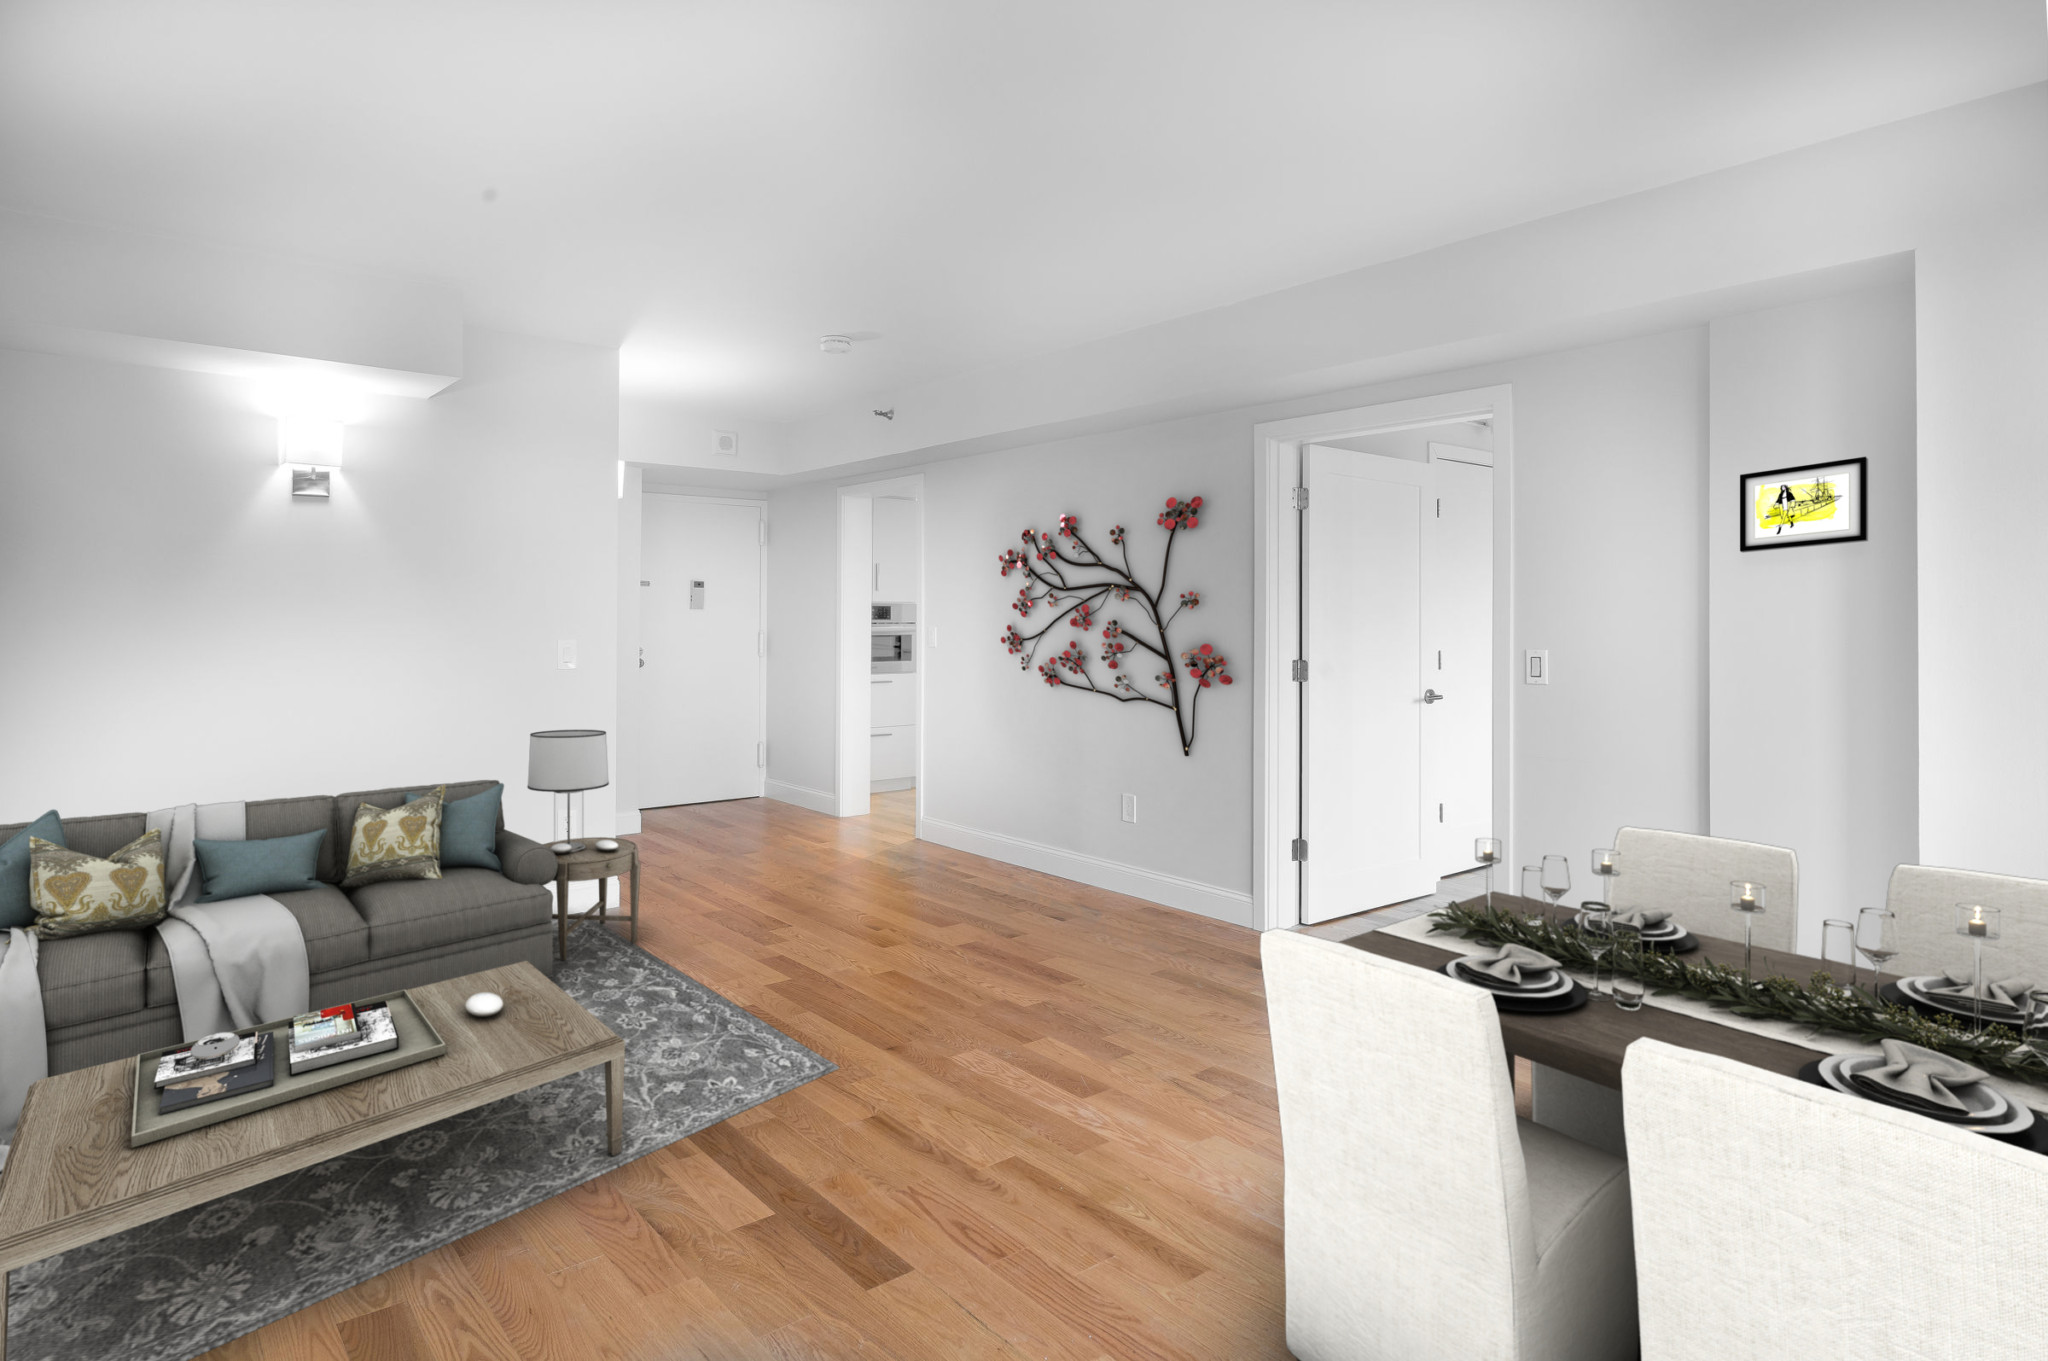 Virtual Staging for Real Estate